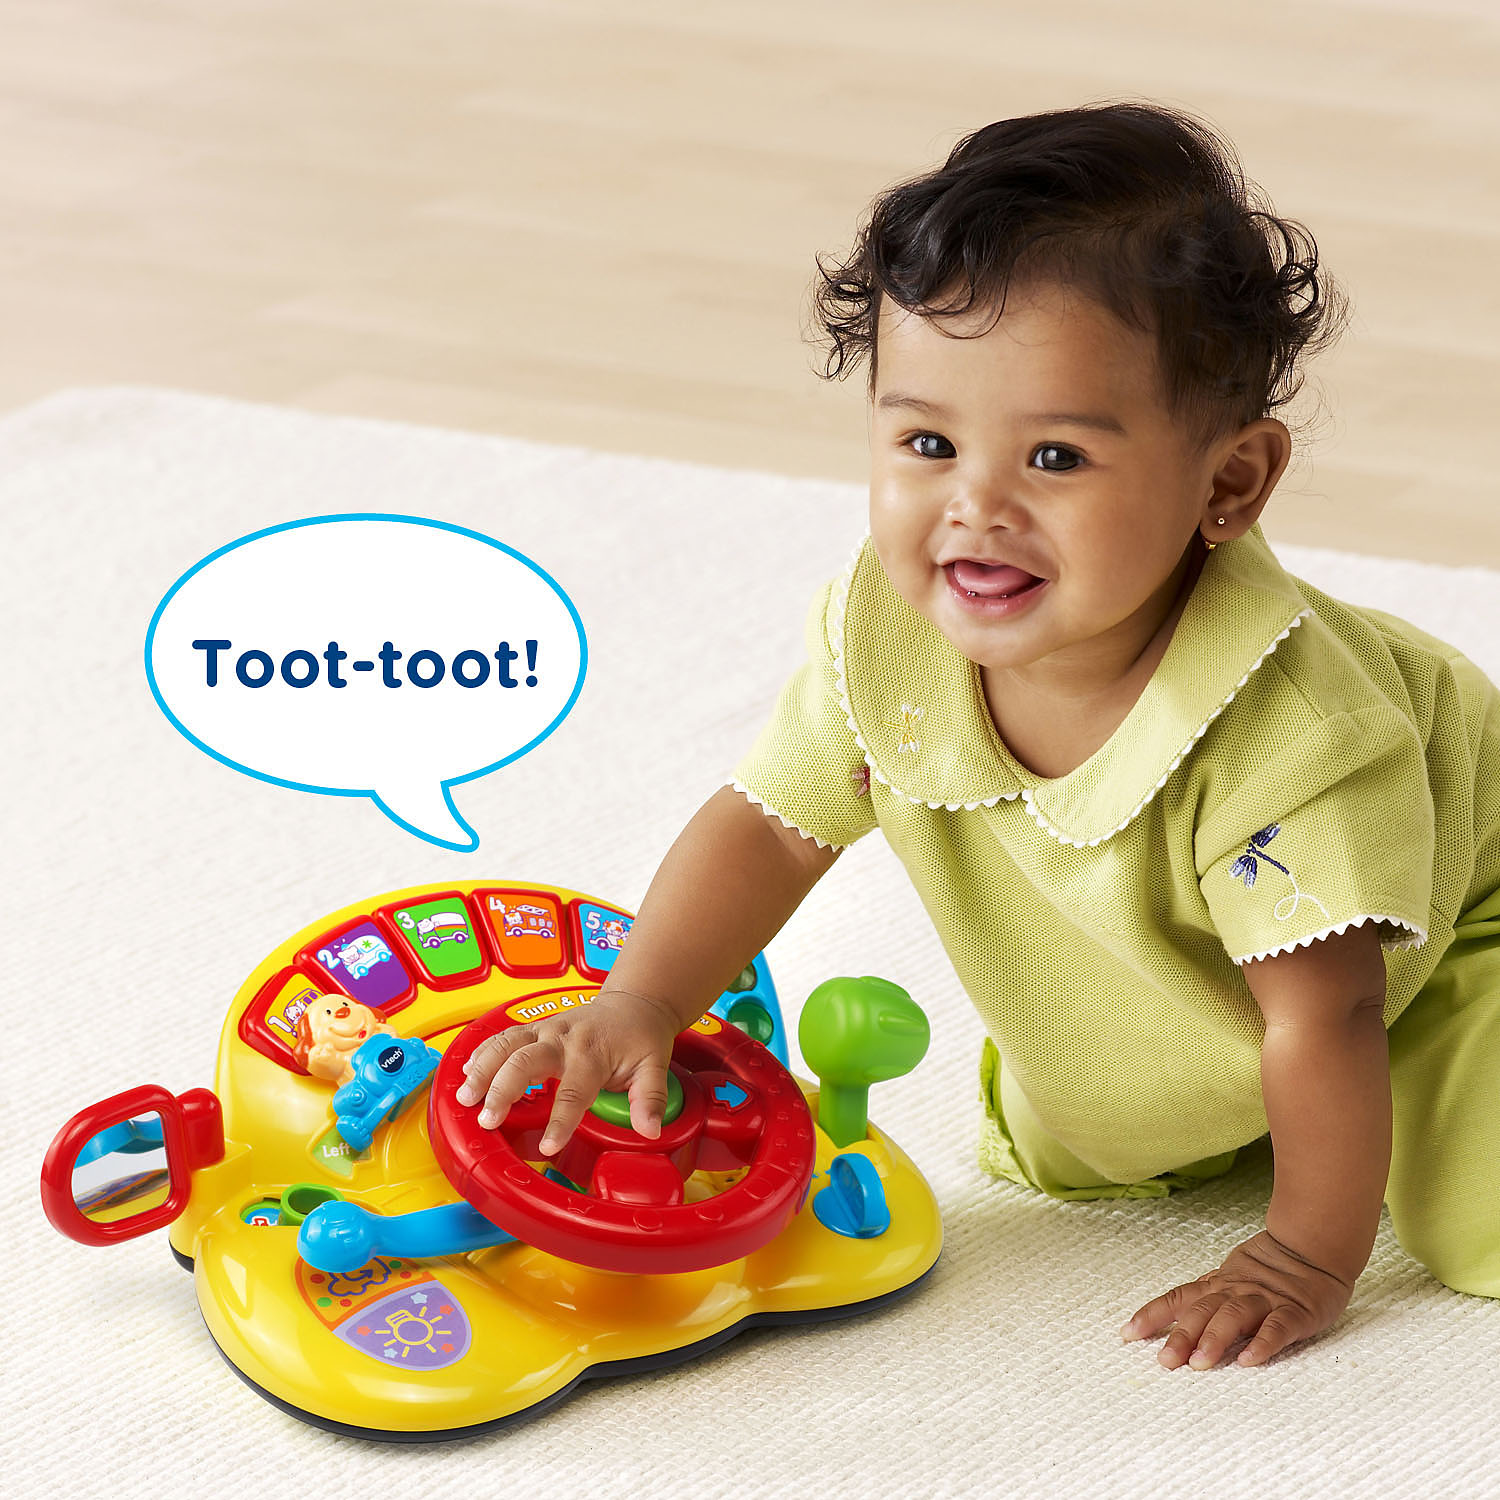 VTech Turn and Learn Driver, Role-Play Toy for Baby, Teaches Animals, Colors - image 5 of 8